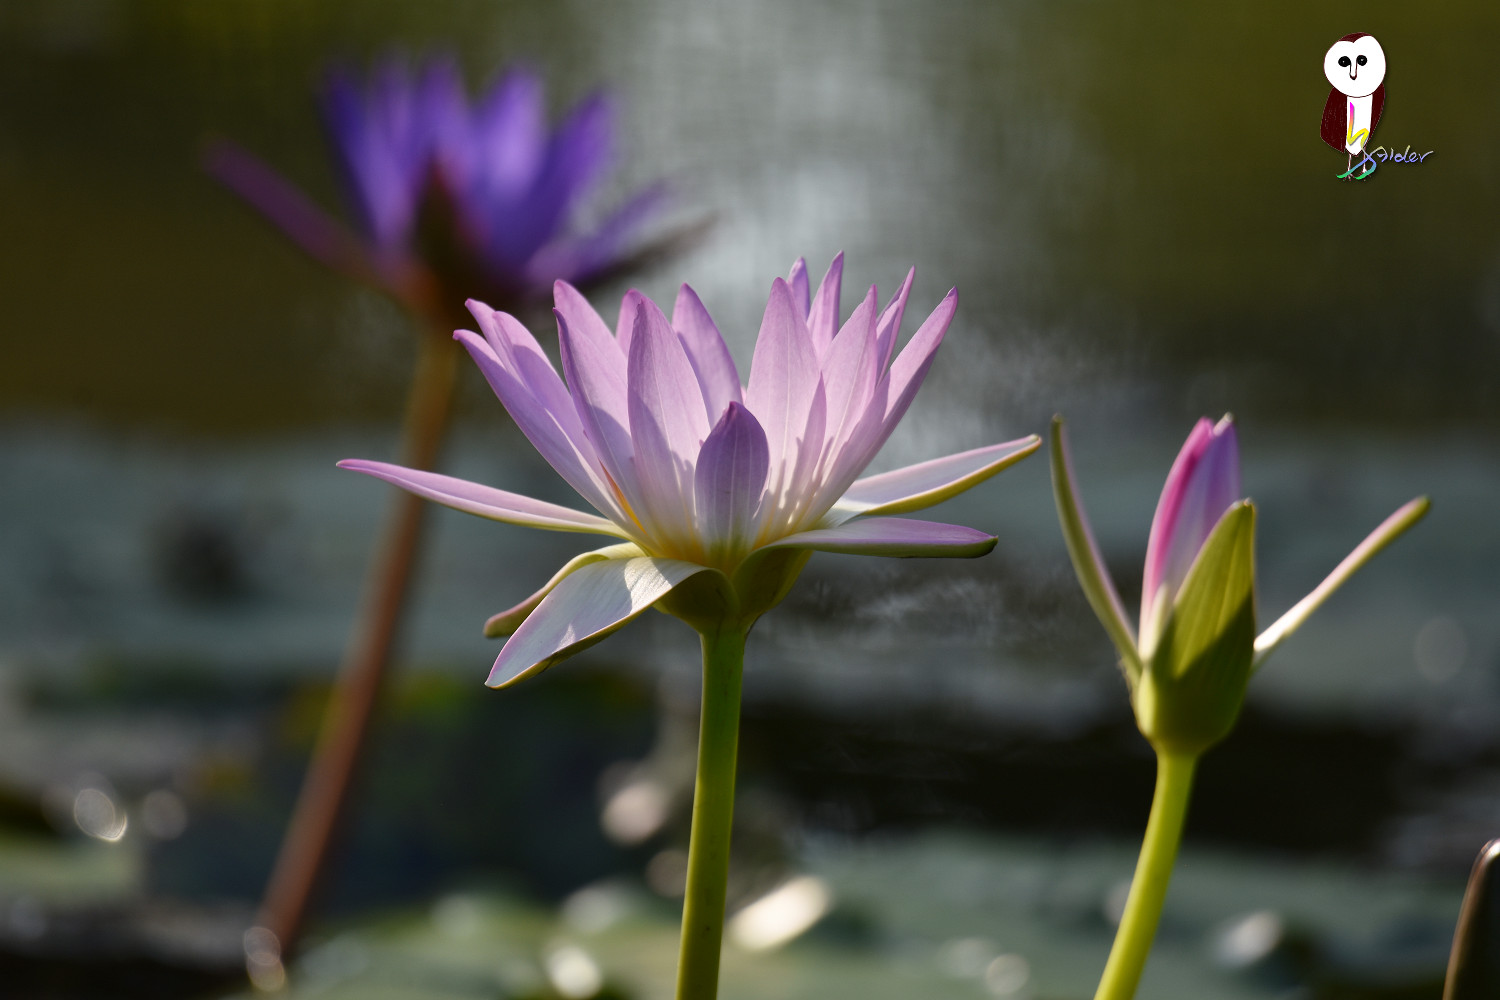 Waterlily_4874